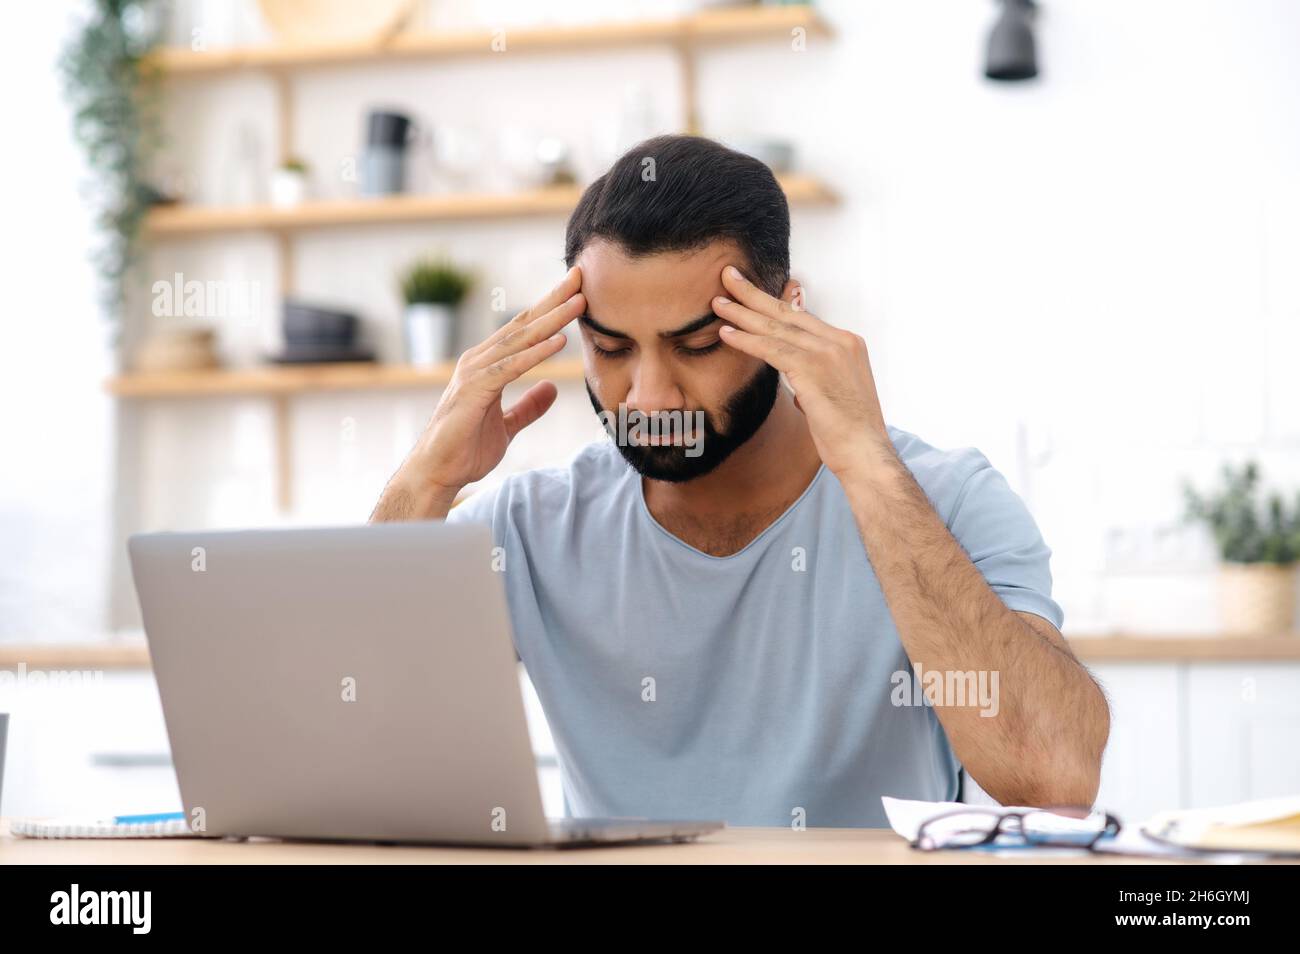 Headache, tiredness. A man of Indian nationality, a freelancer, works from home while sitting in the kitchen, uses a laptop, is tired, takes a break from work, closed his eyes, massages temples Stock Photo